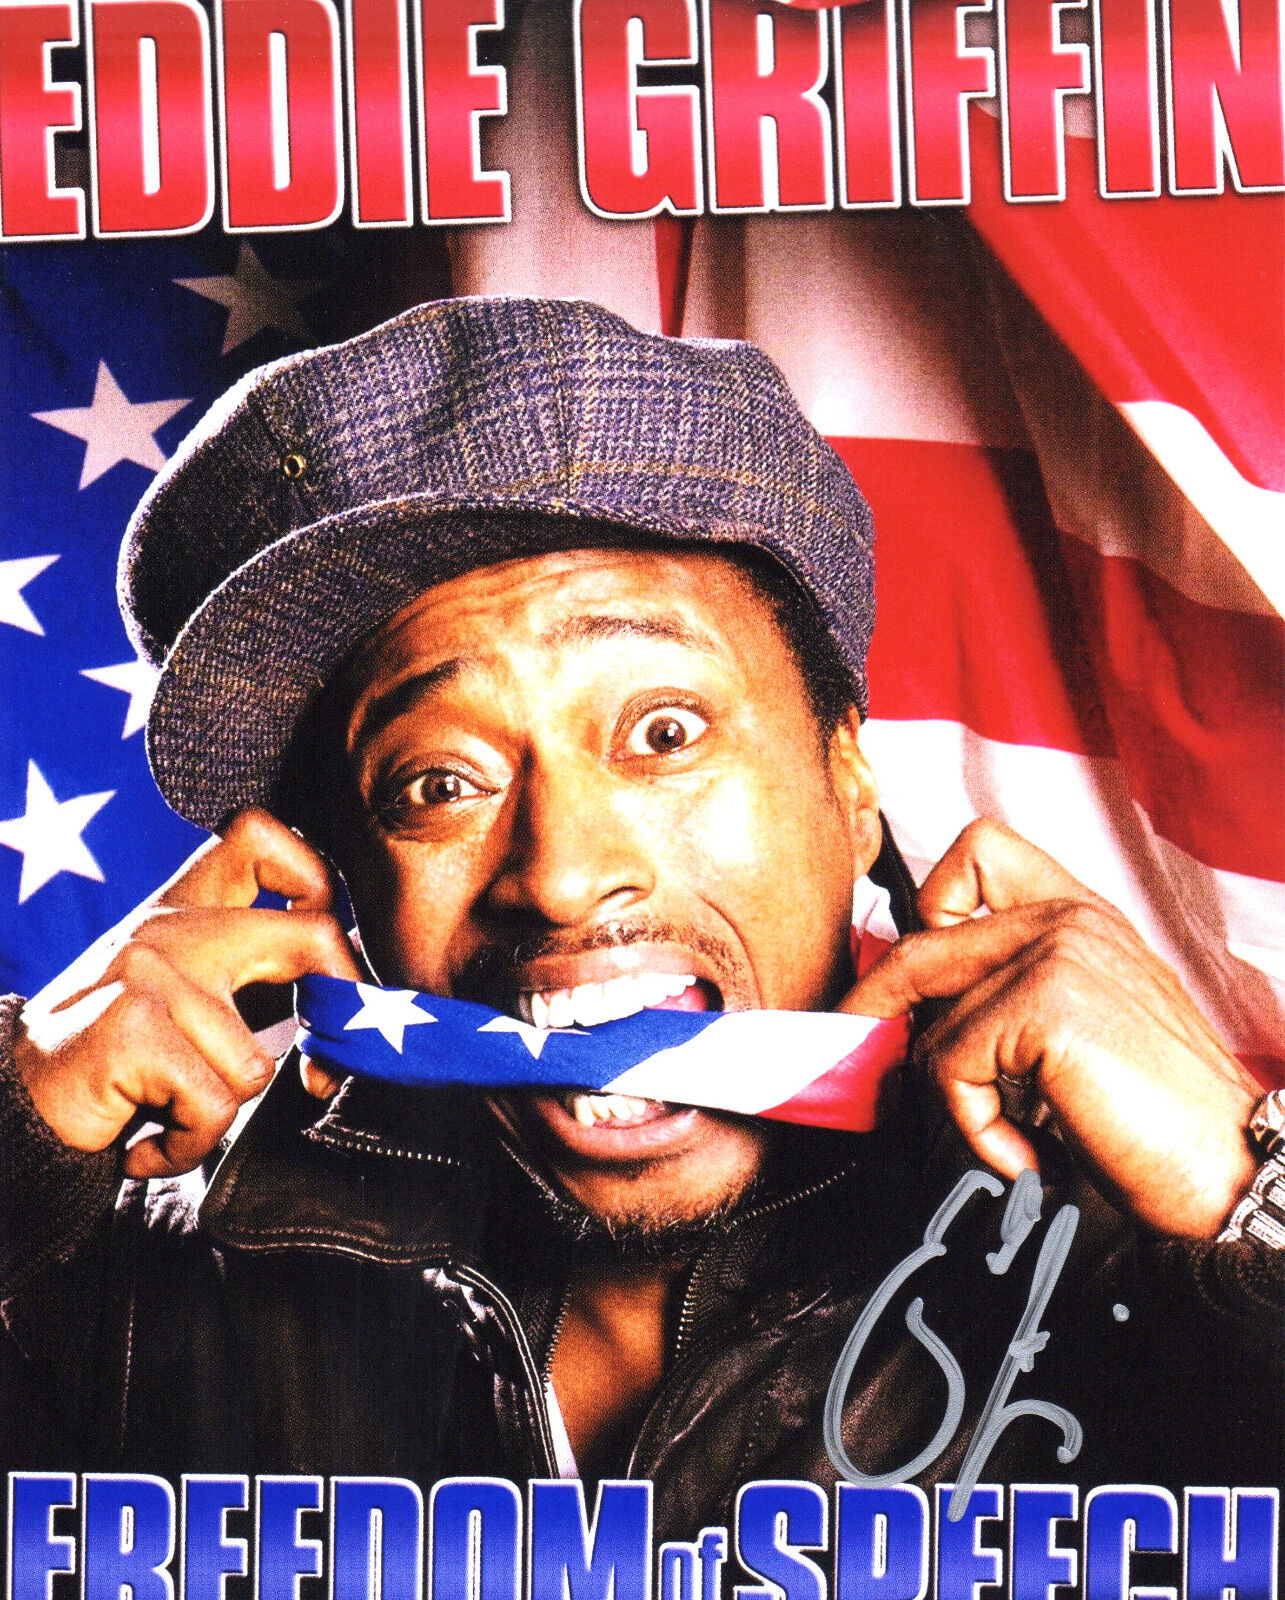 GFA Stand Up Comedian * EDDIE GRIFFIN * Signed 8x10 Photo Poster painting AD3 PROOF COA